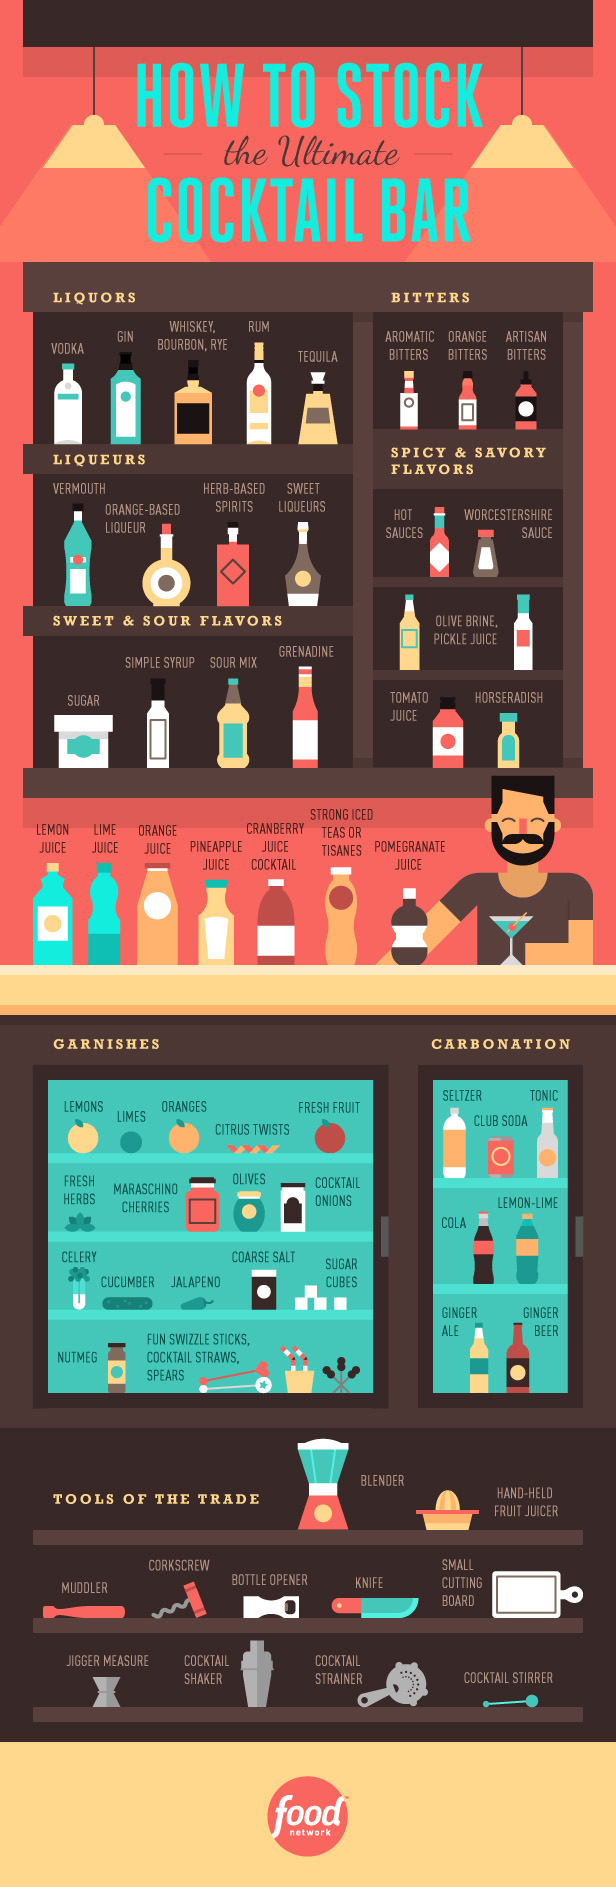 https://food.fnr.sndimg.com/content/dam/images/food/unsized/2015/9/30/0/FN_Infographic-Stock-a-Cocktail-Bar_s616x1887.jpg